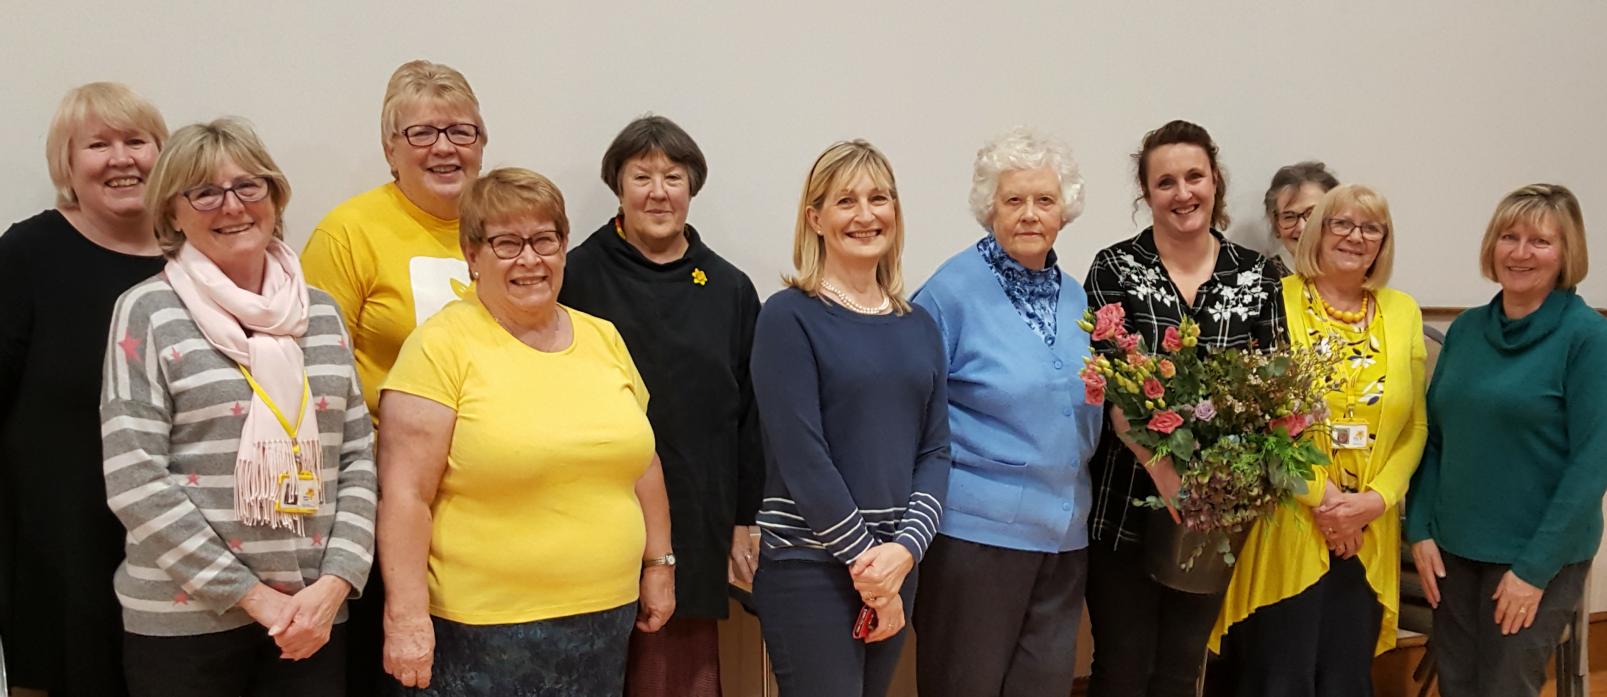 VITAL FUNDRAISING: Members of the group with Sarah Meeson, who is pictured with the flowers